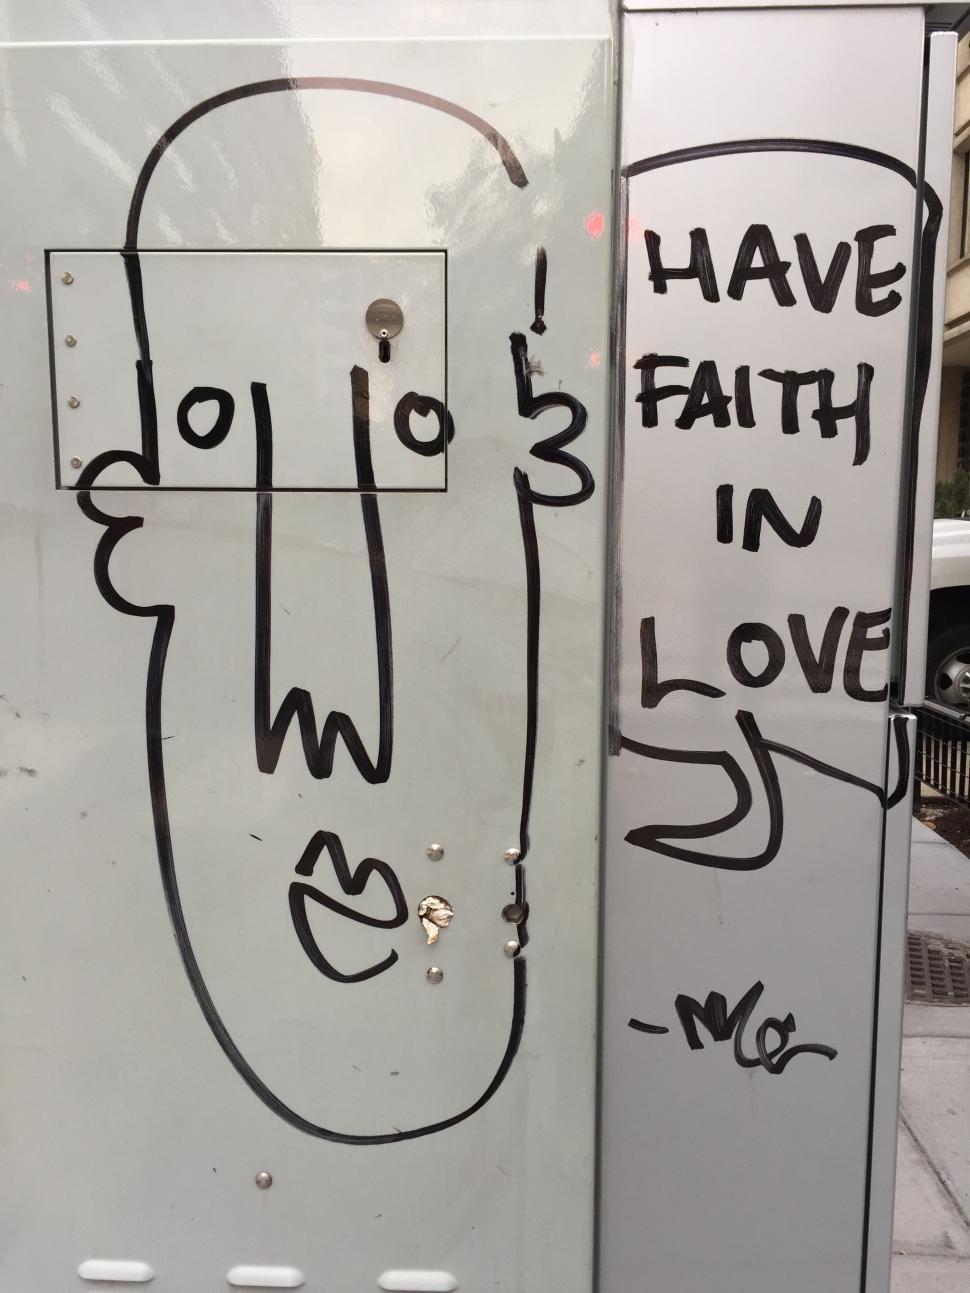 Free Image of Have faith in love  